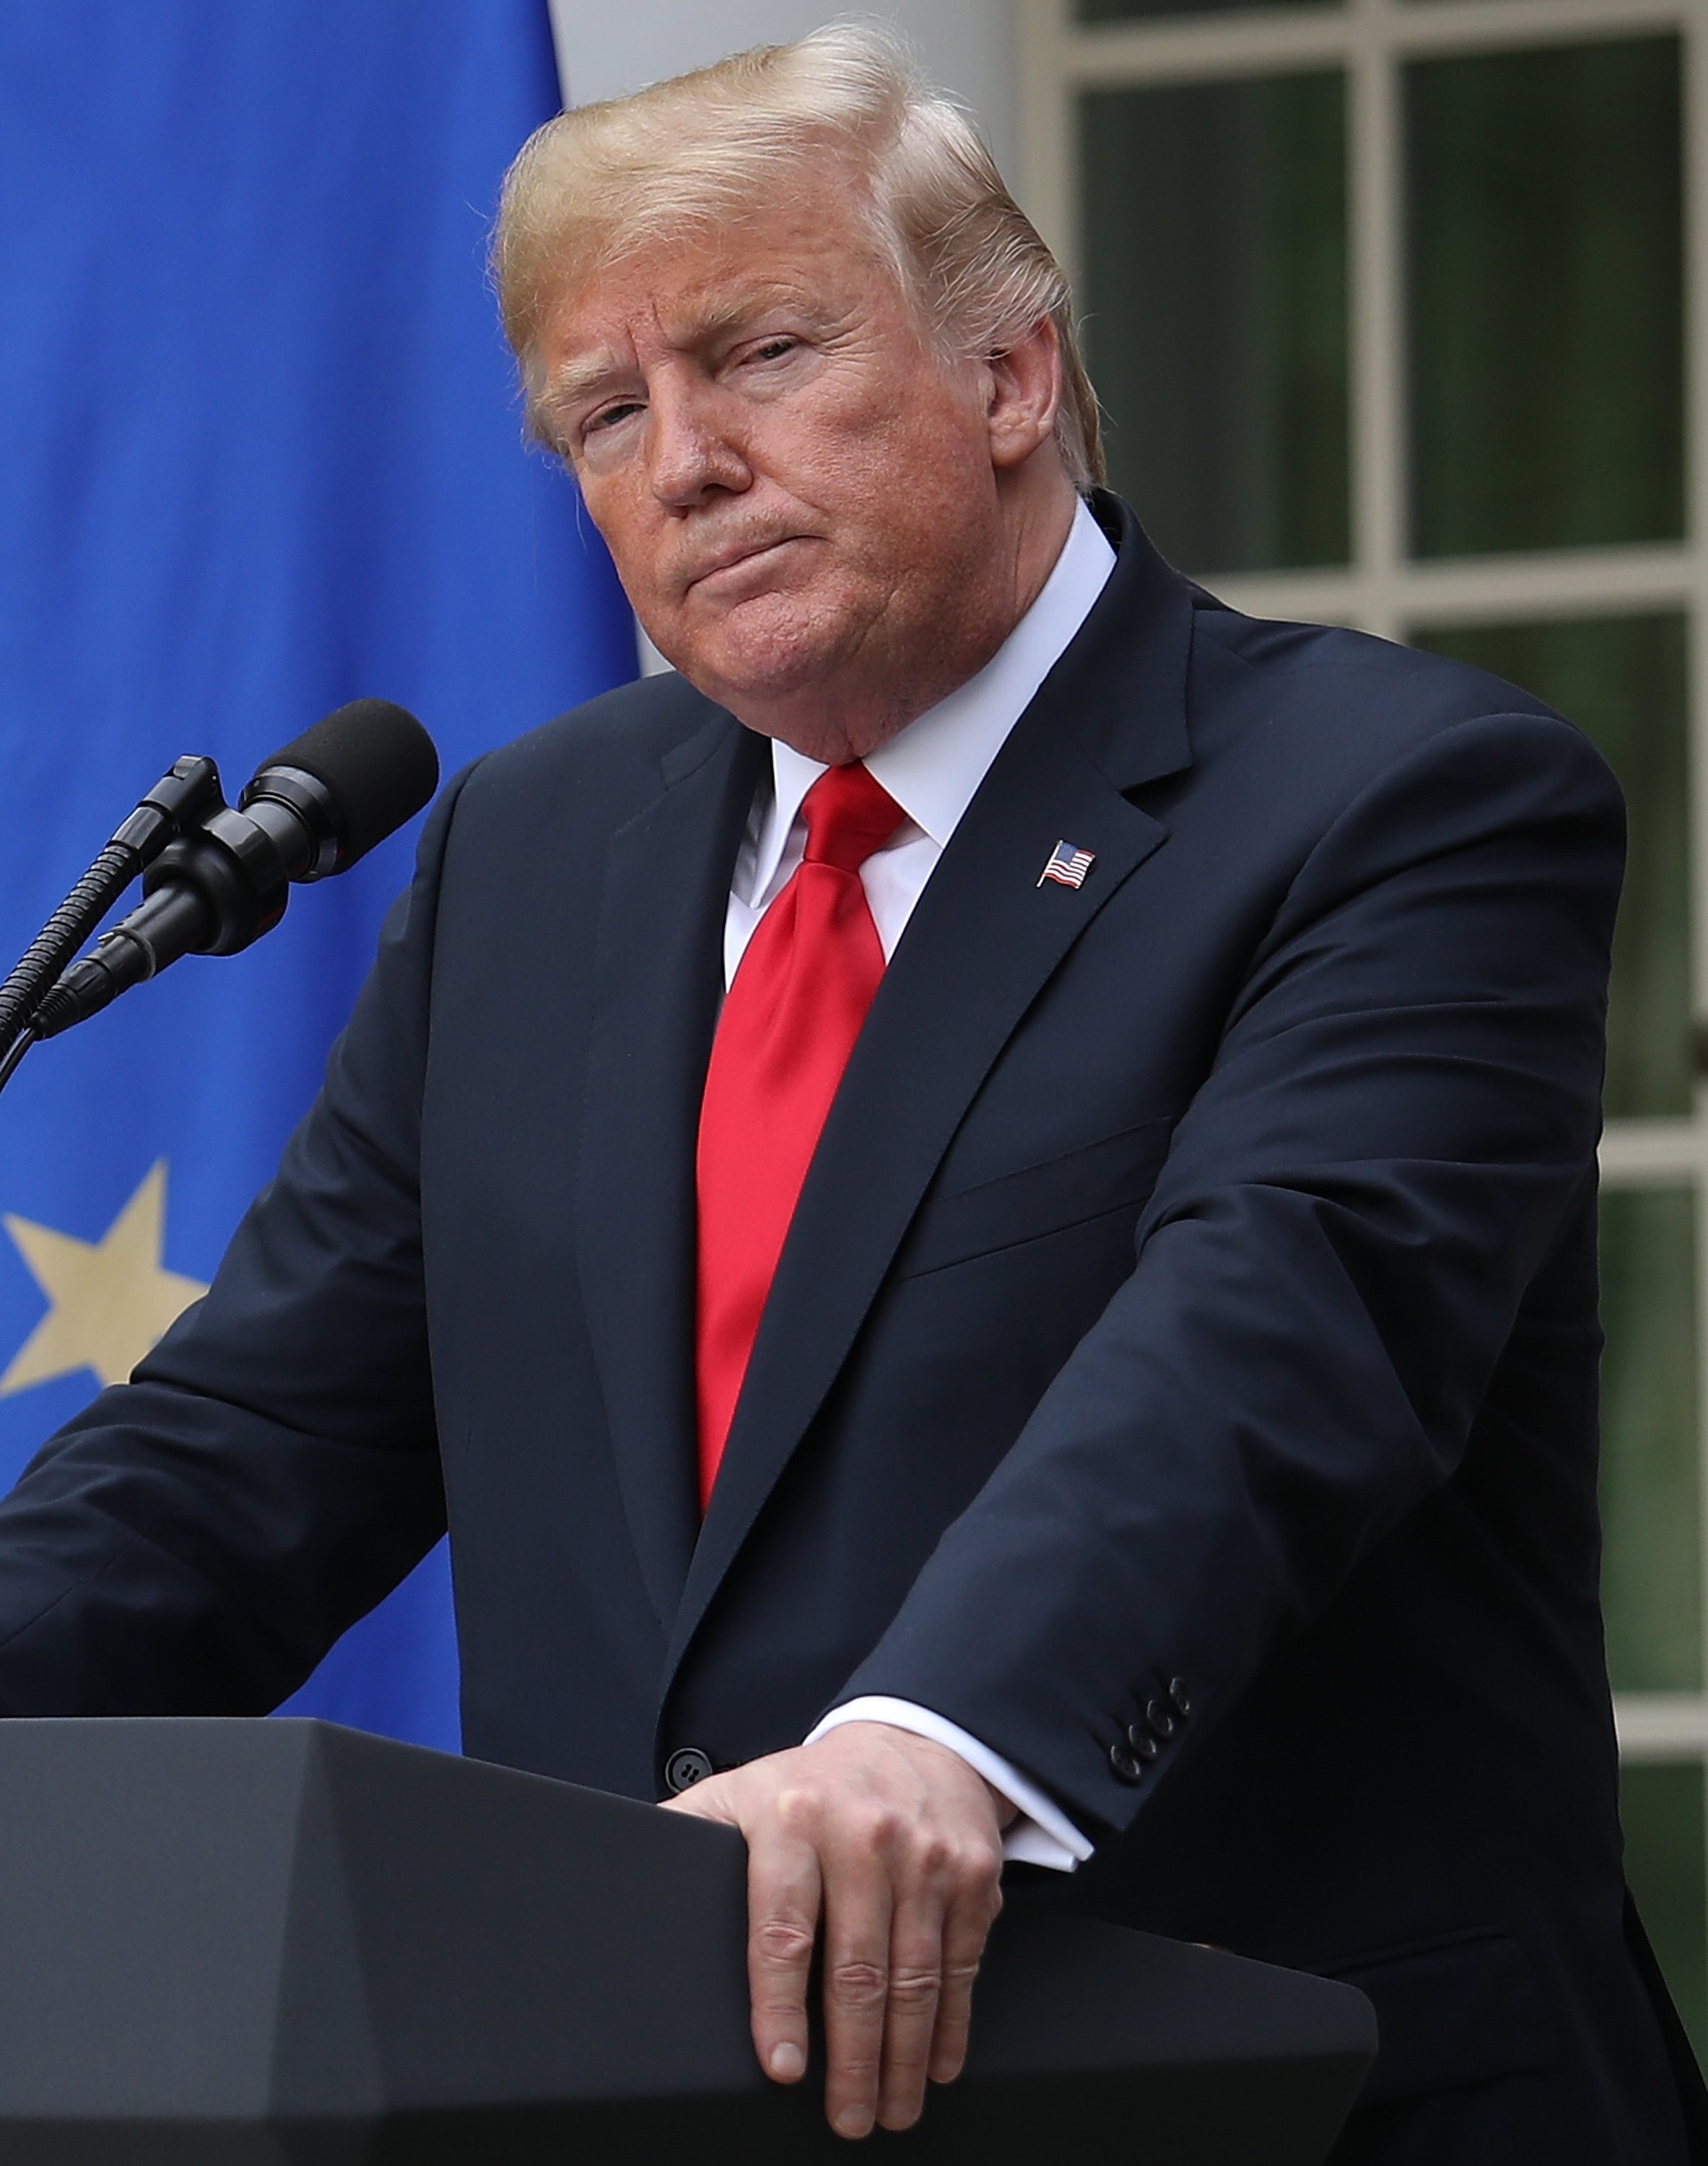 President Donald Trump in the Rose Garden of the White House on July 25, 2018.